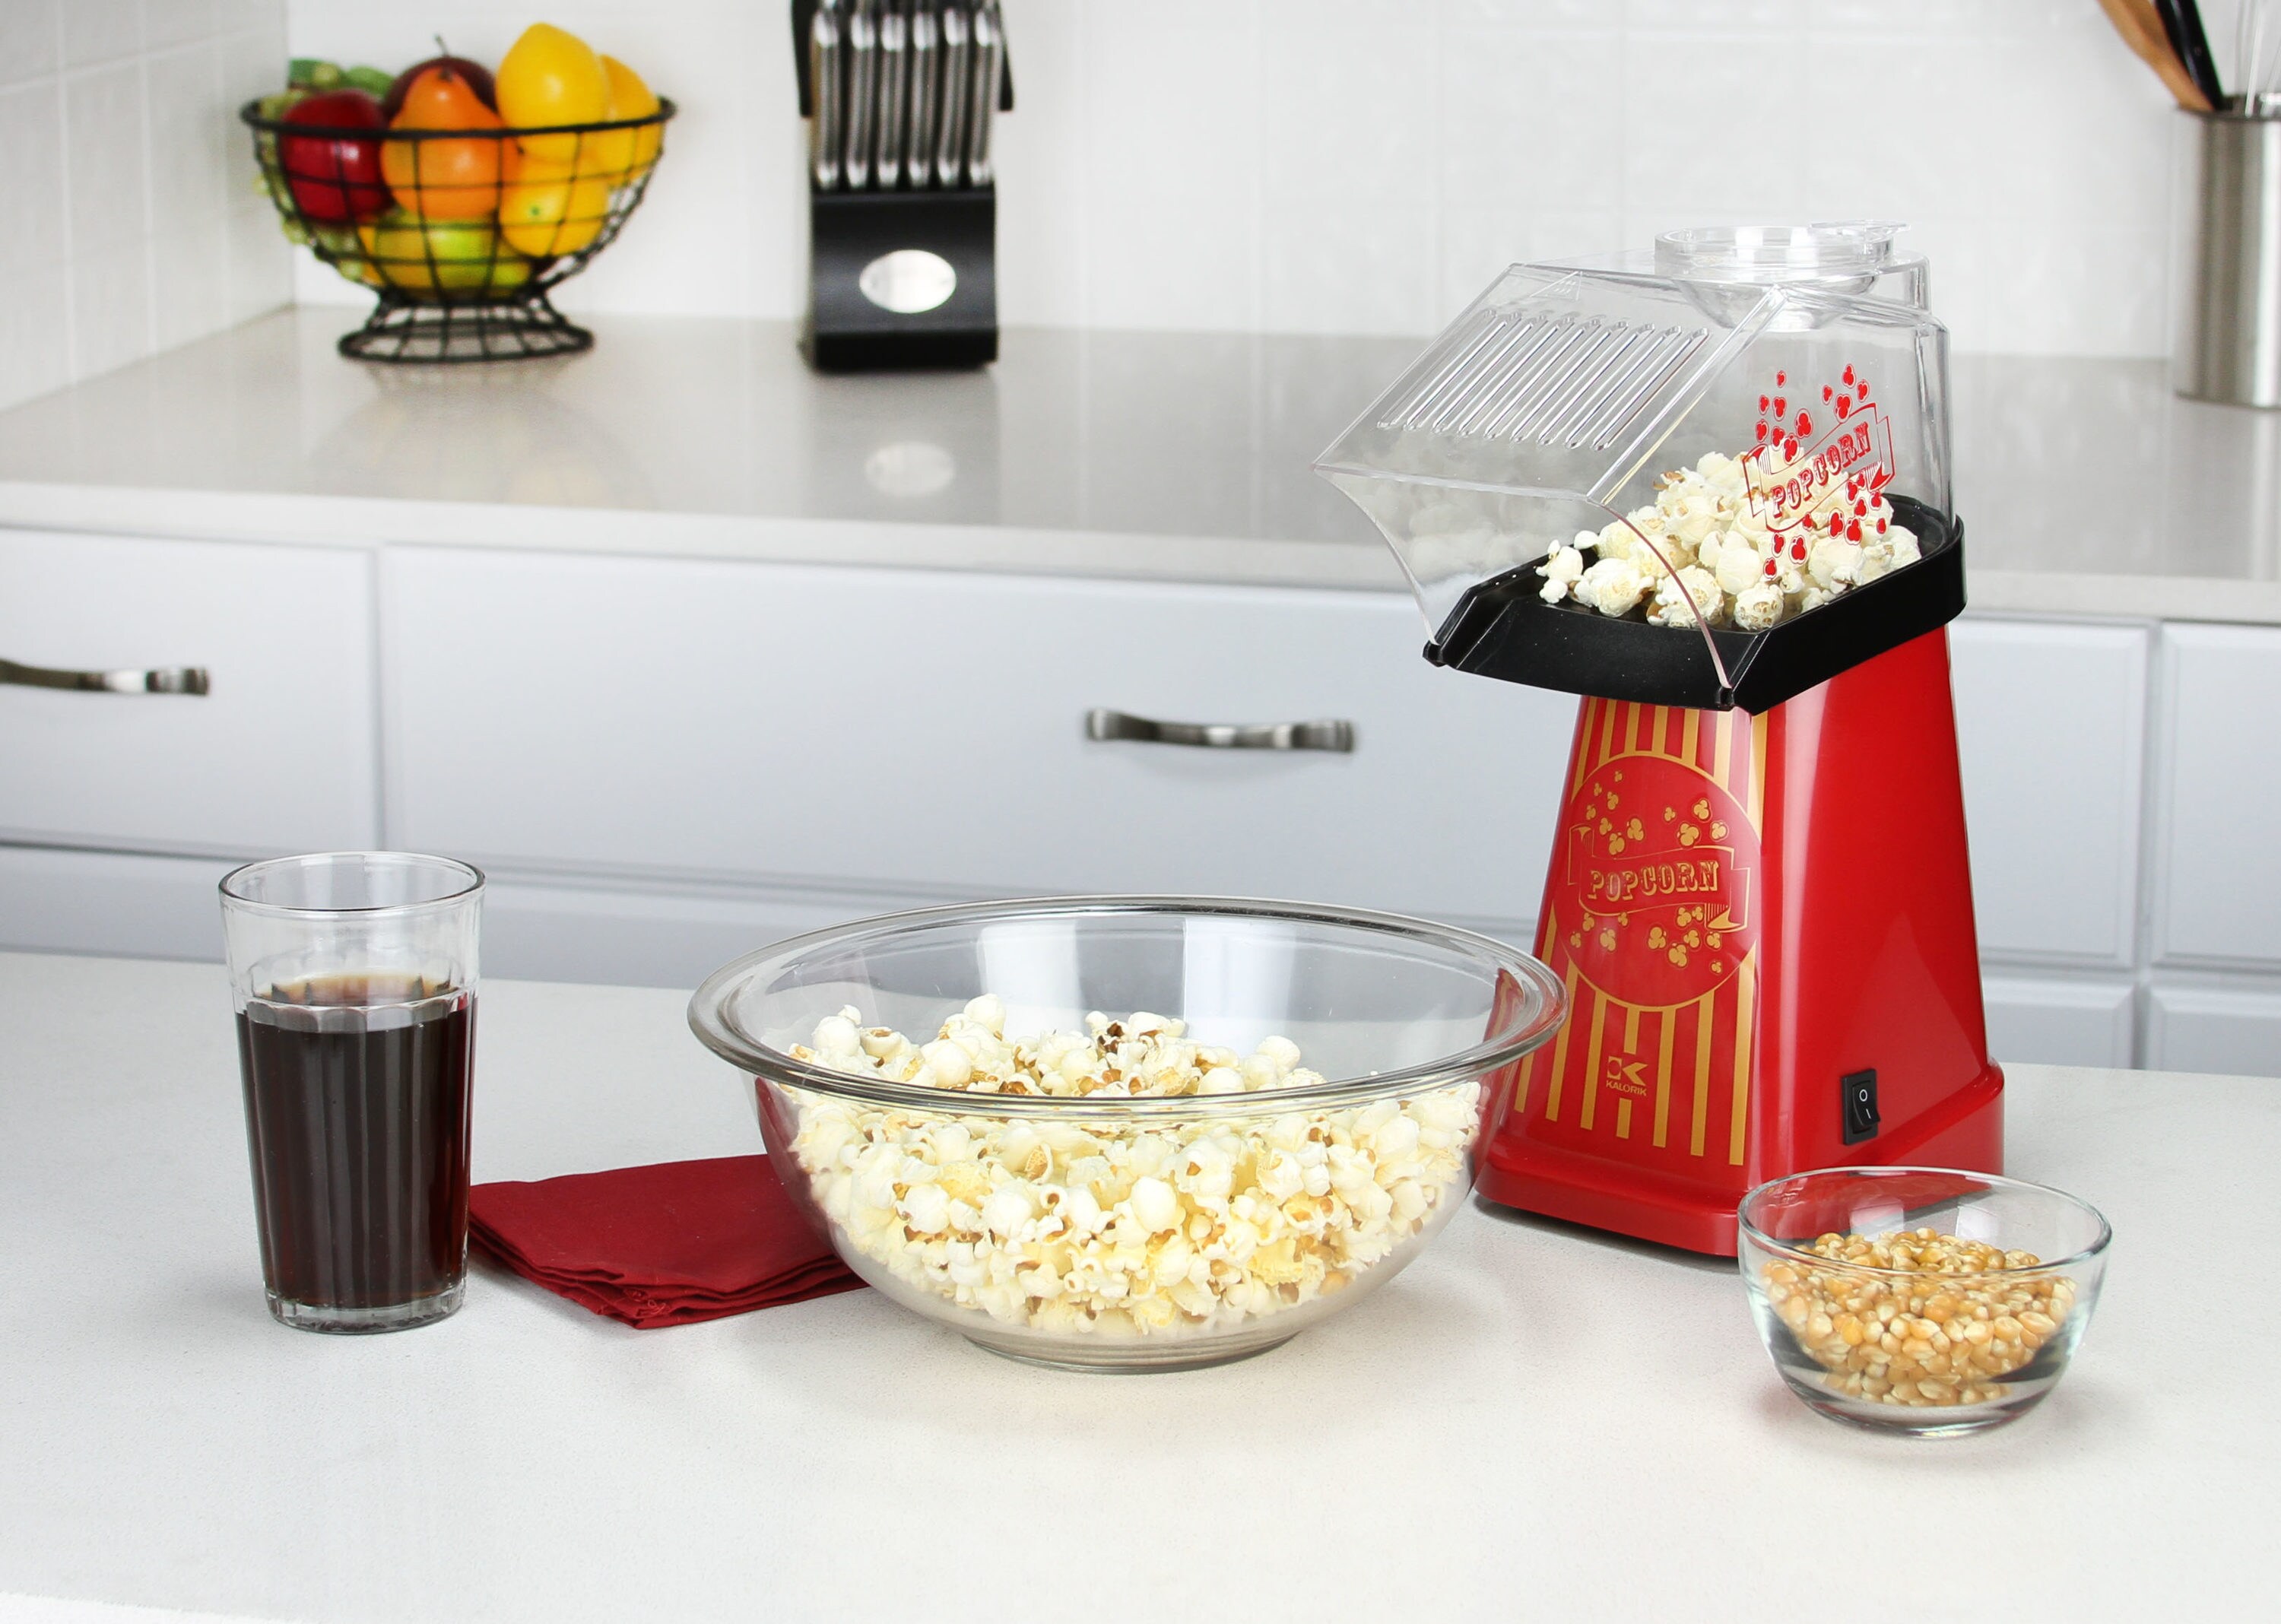 brentwood Brentwood Hot Air Popcorn Maker - Red, Tabletop Popcorn Machine  with Butter Dispenser, 1200W Power